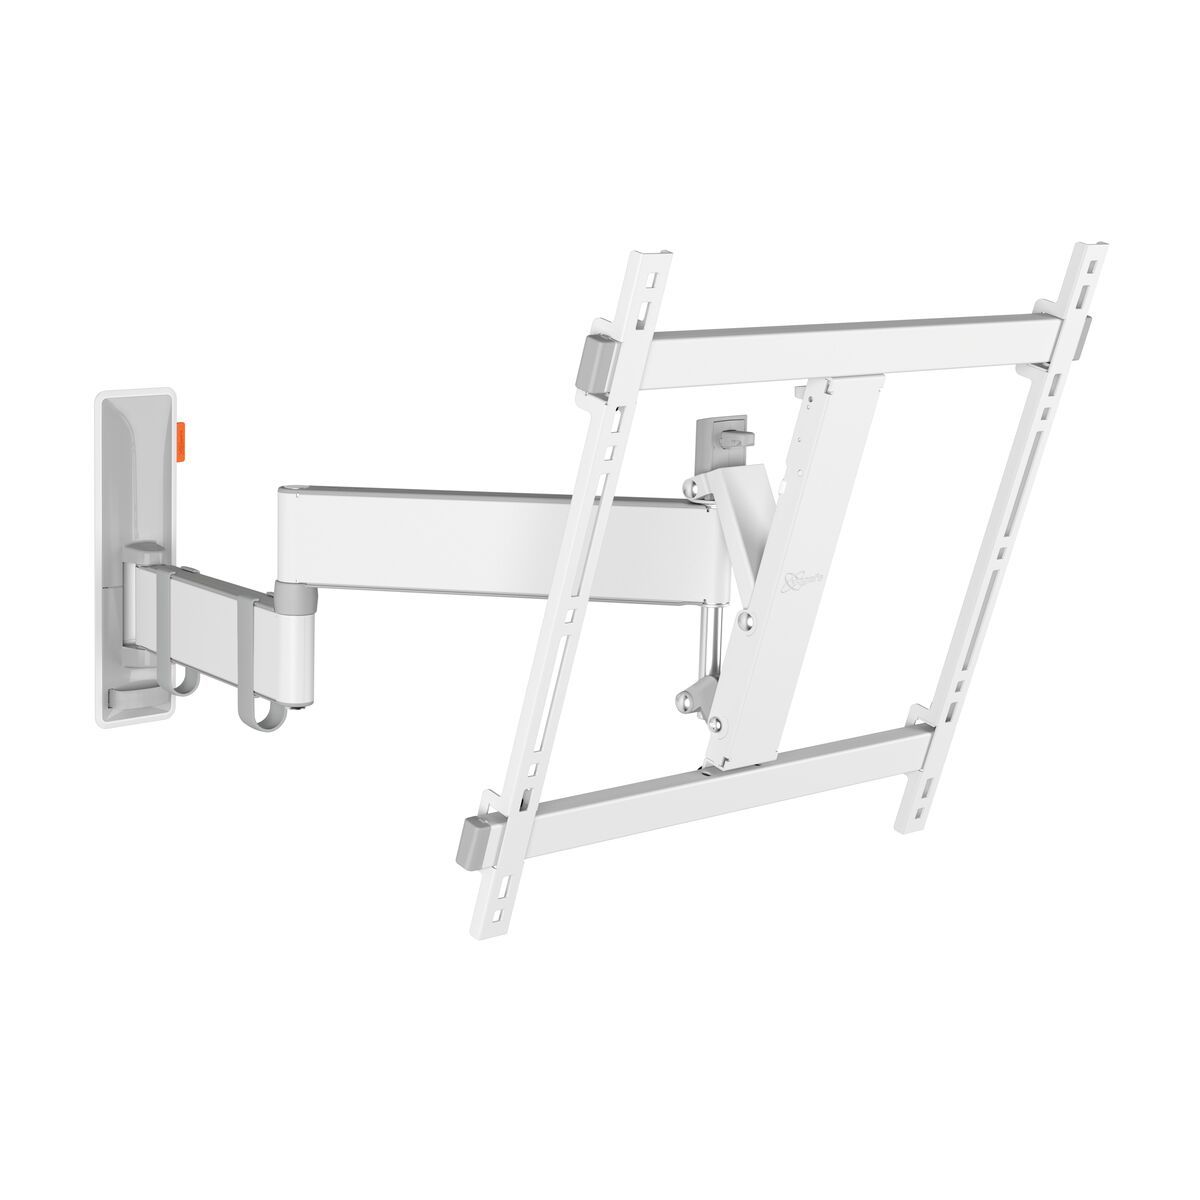 Vogel's TVM 3445 Full-Motion TV Wall Mount (white) - Suitable for 32 up to 65 inch TVs - Full motion (up to 180°) swivel - Tilt up to 20° - Product